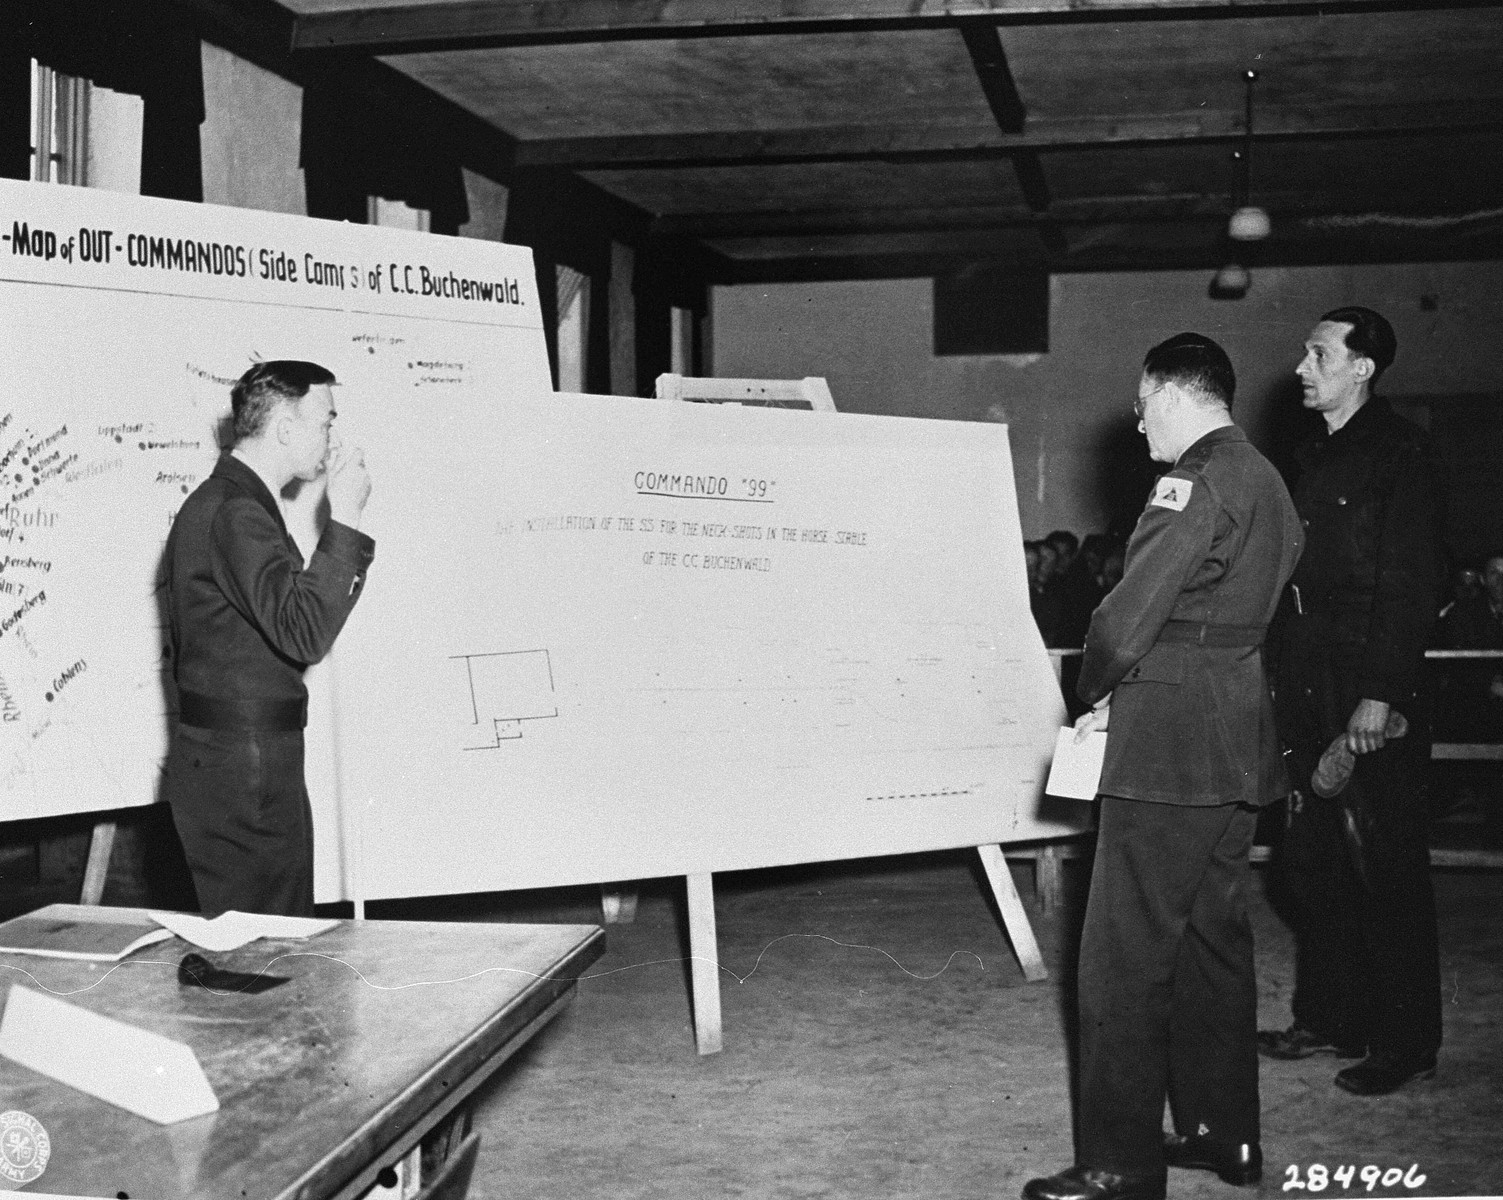 Horst Dittrich (right), a witness for the prosecution, identifies a diagram of a stable where prisoners were shot, at the trial of former camp personnel and prisoners from Buchenwald. 

Looking on are lead U.S. Prosecutor William Denson (left) and interpreter Rudloph Nathanson (center).